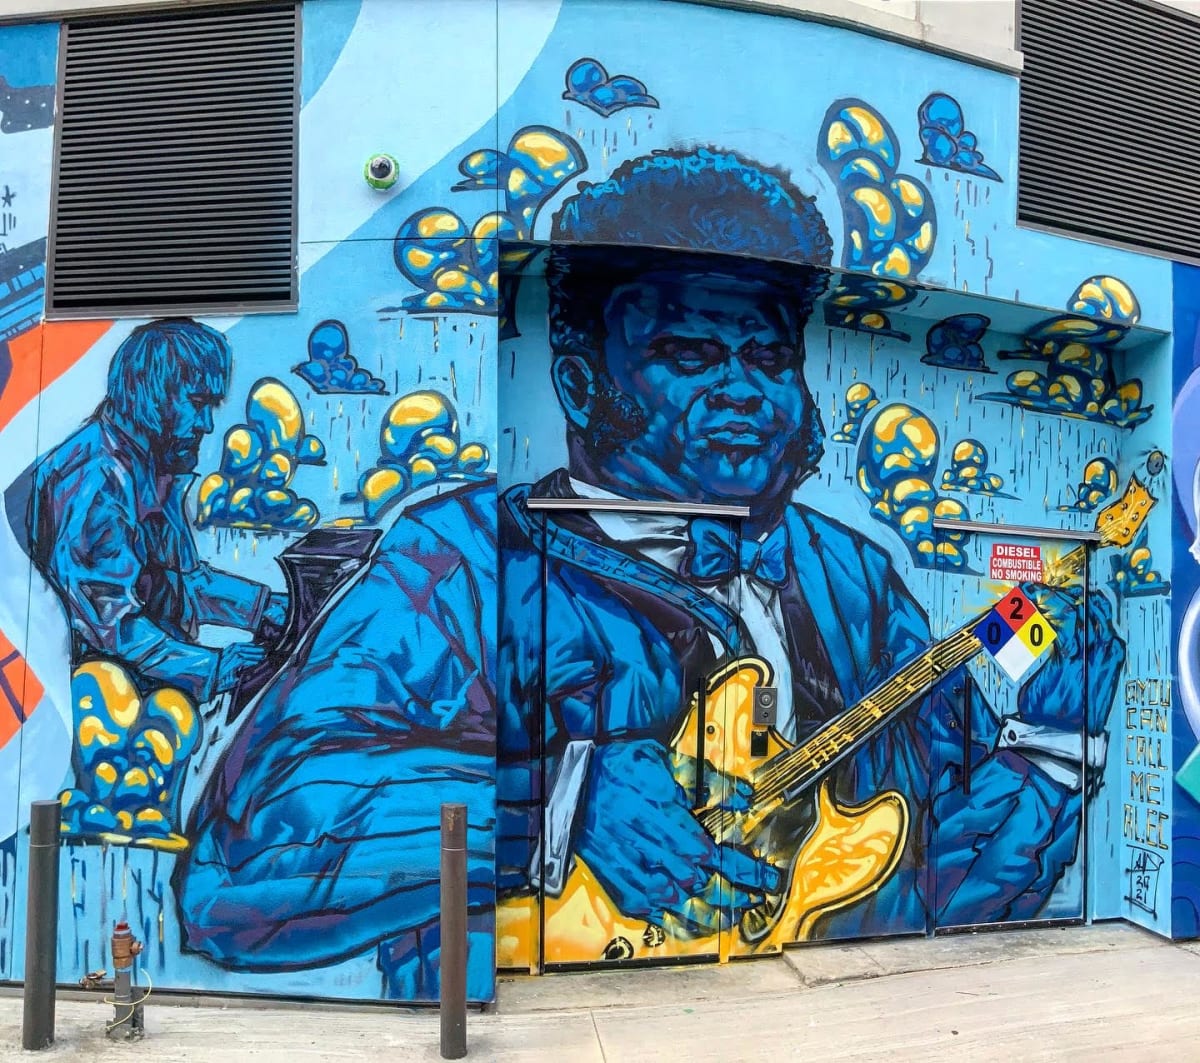 Texas Cannon Ball (A tribute to Freddie King)  Image: Commissioned mural